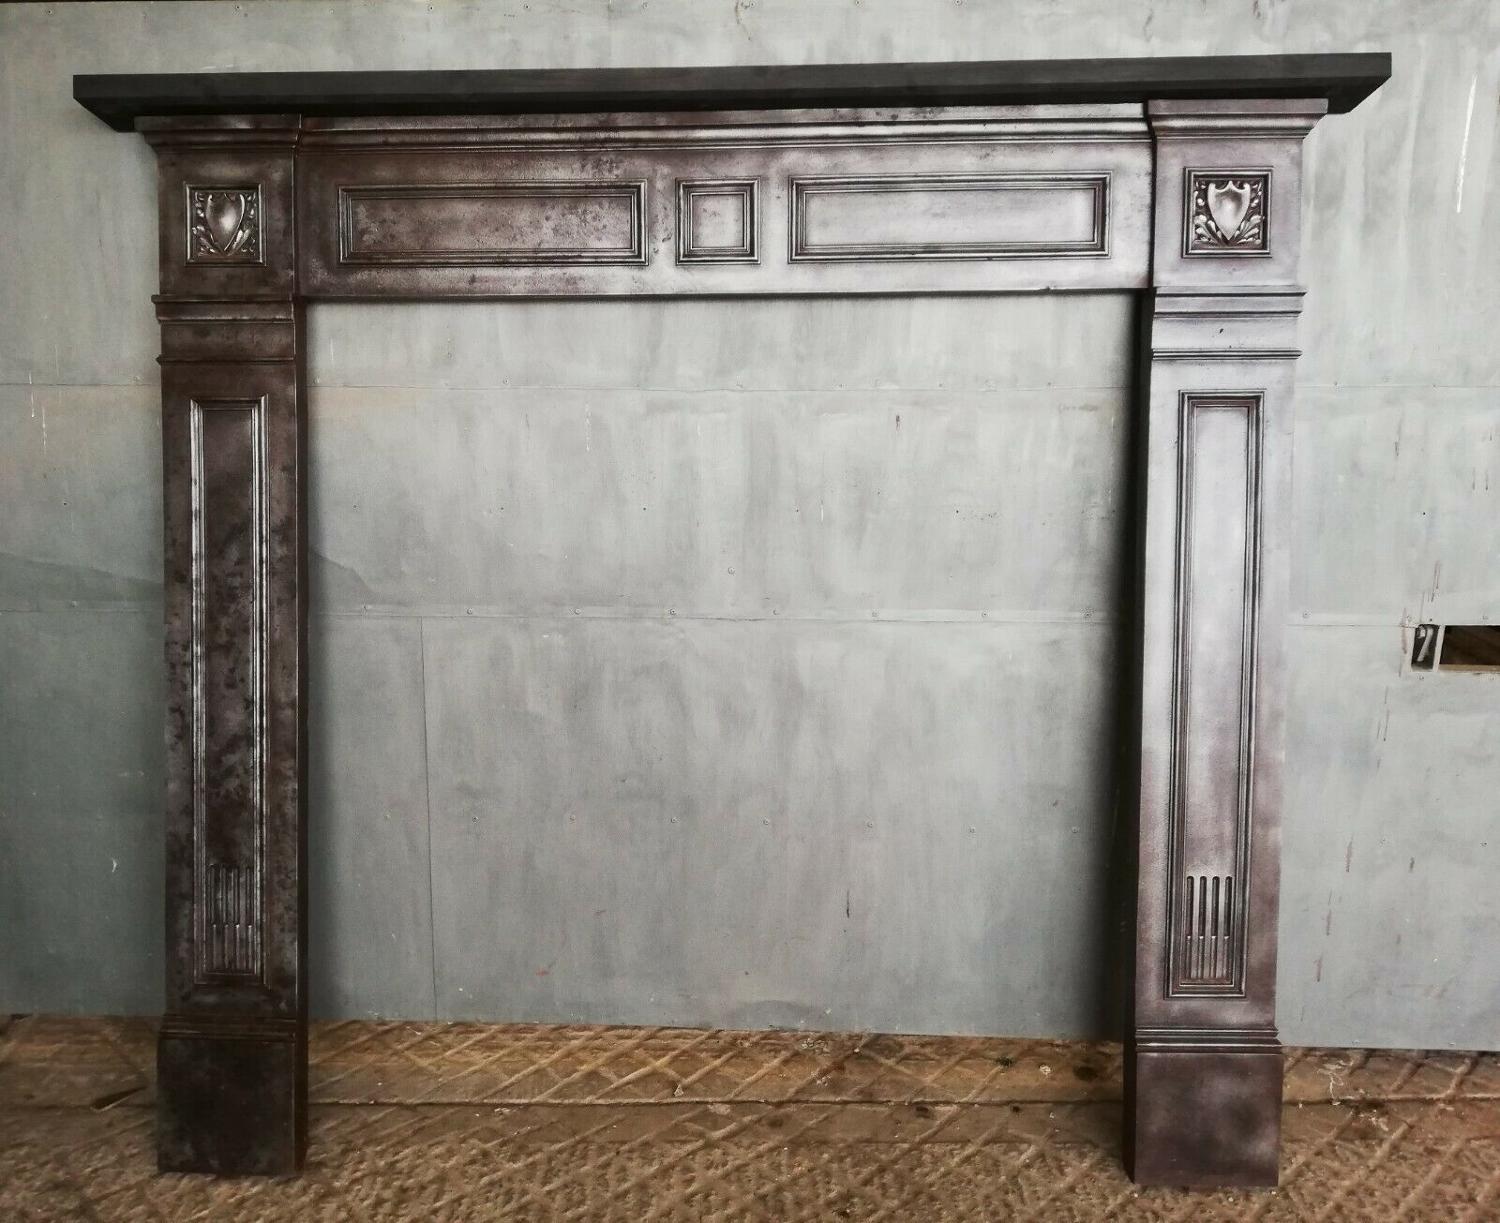 FS0059 VERY LARGE VICTORIAN CAST IRON FIRE SURROUND WITH PINE MANTEL